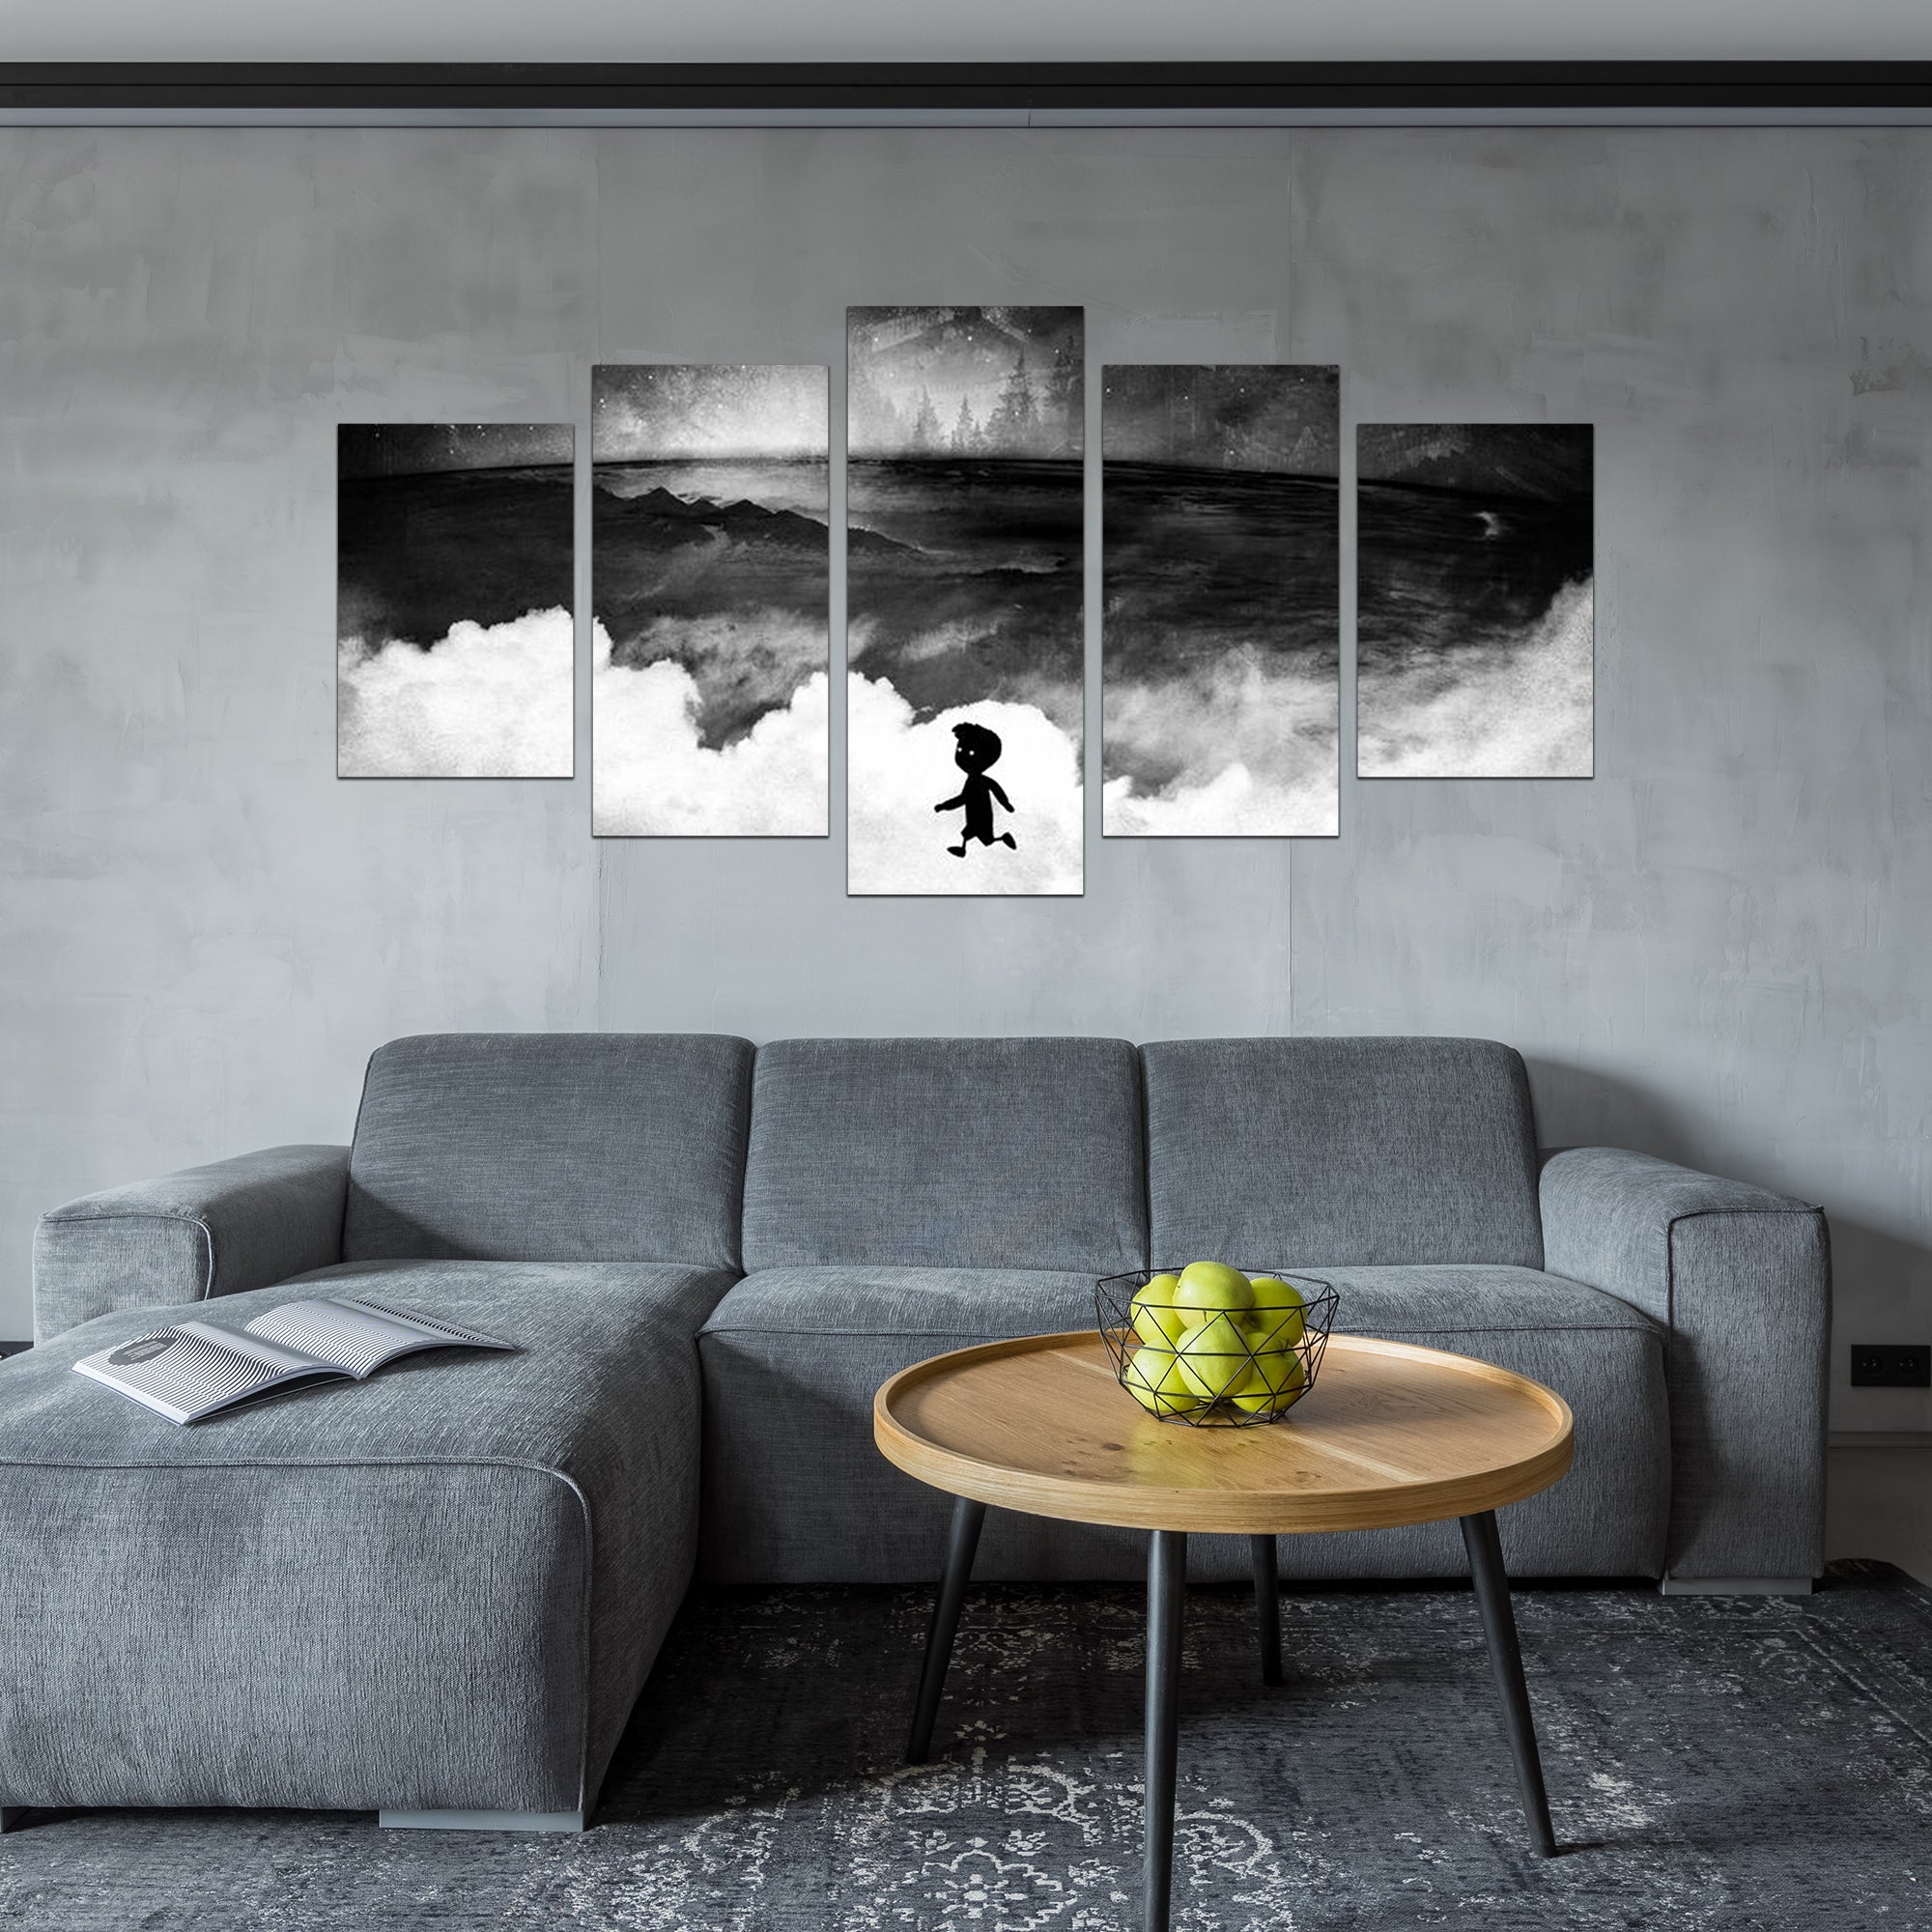 Beyond Shadows: Limbo-Inspired Wall Canvas Art Redefined